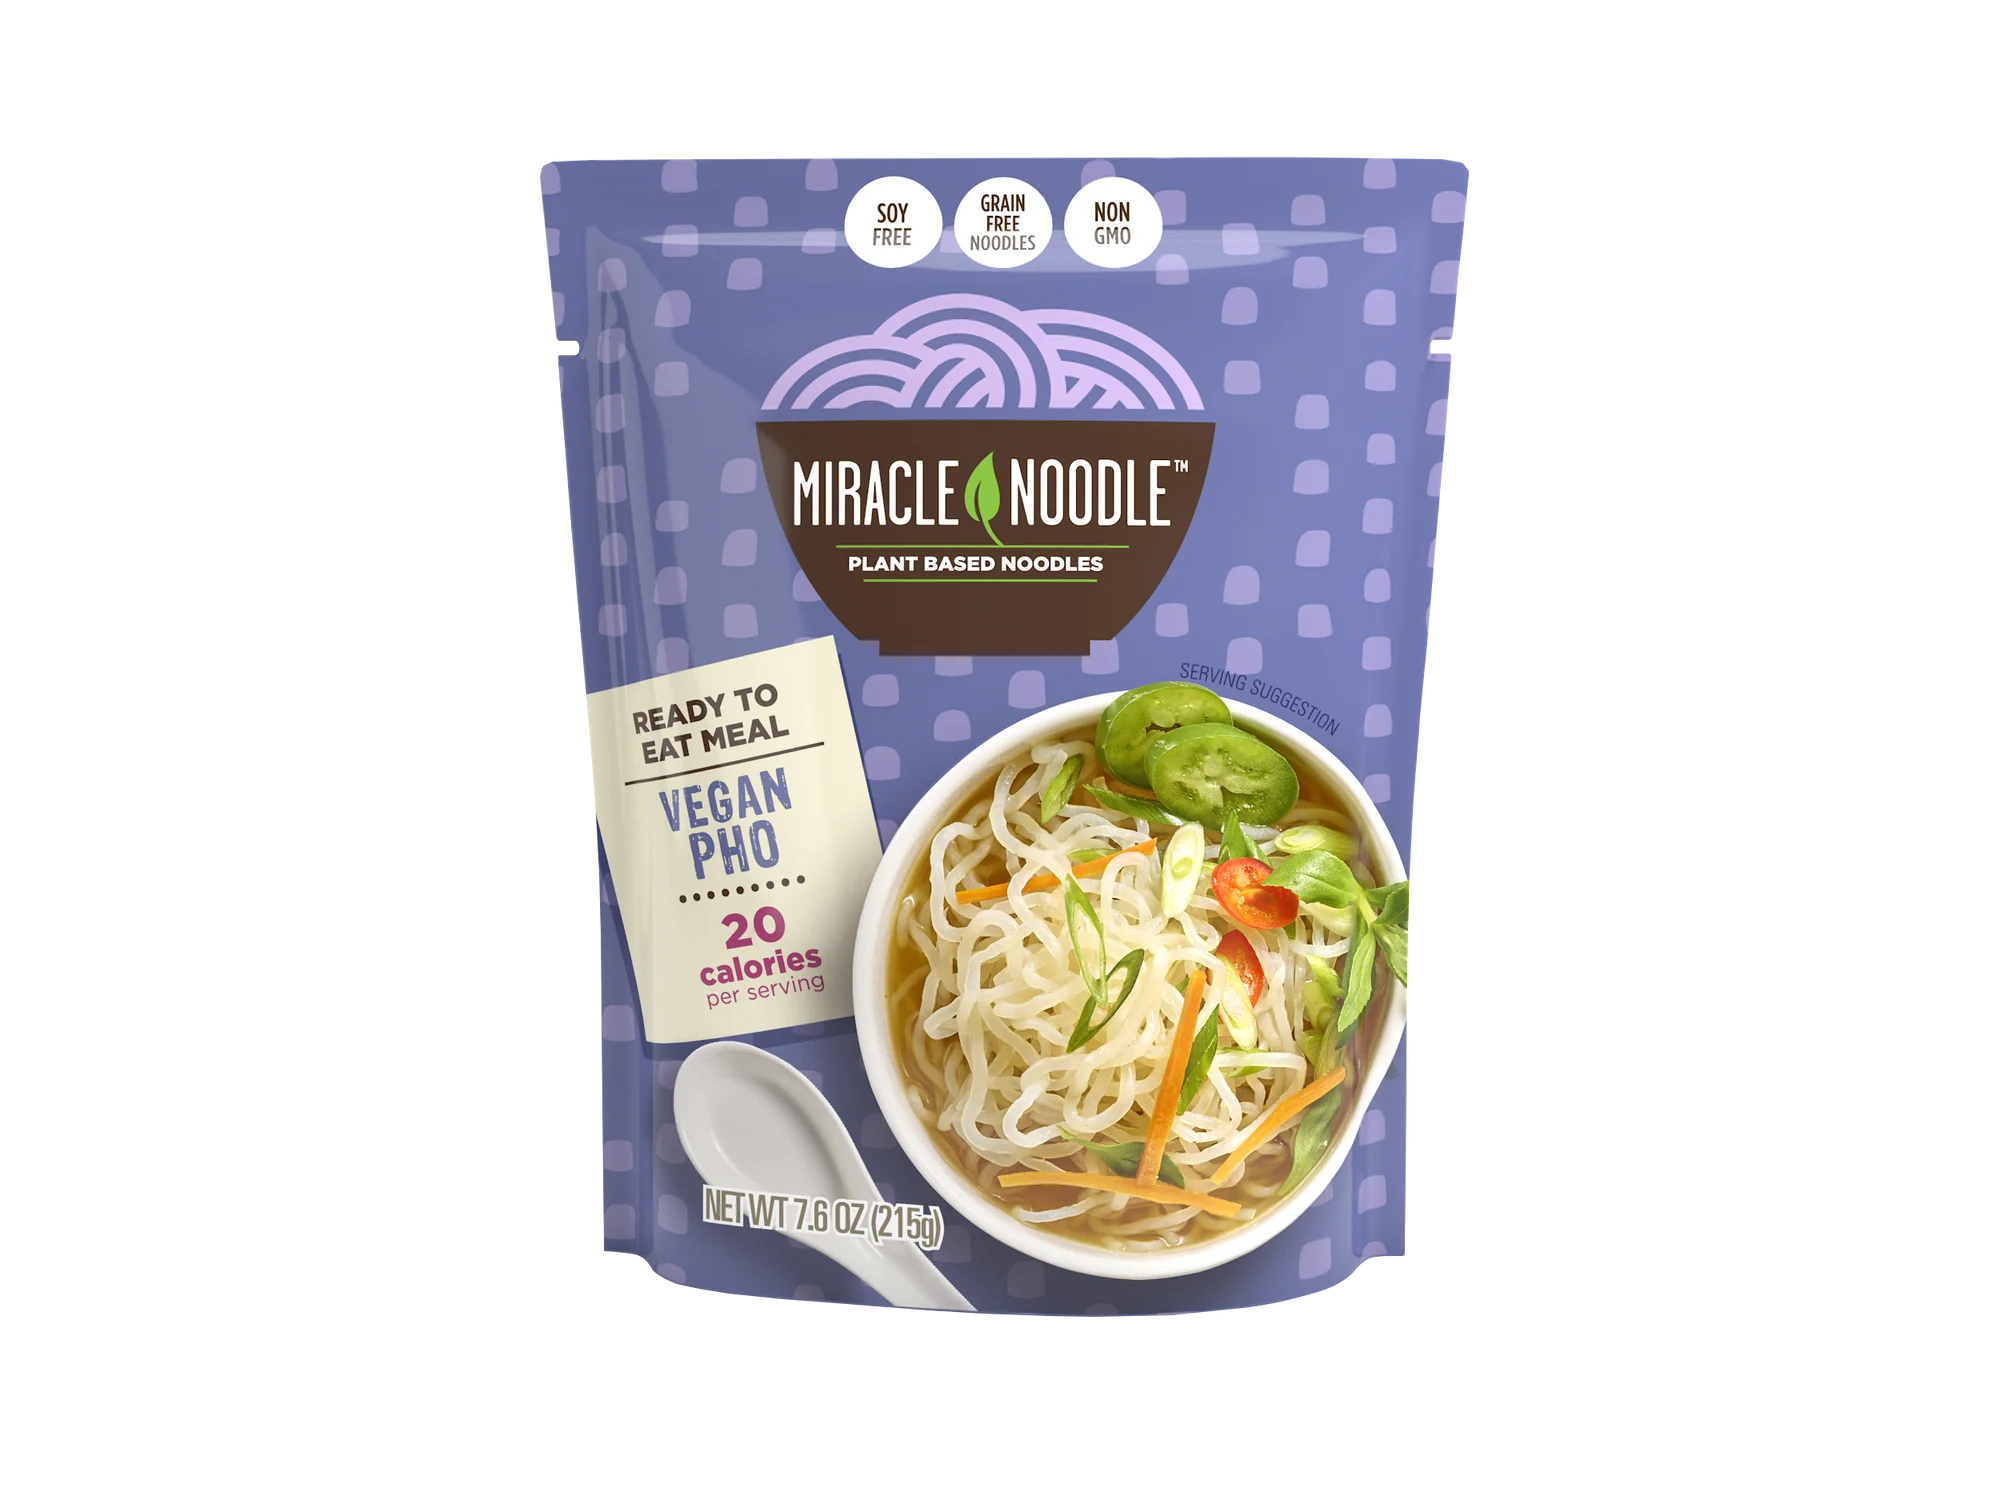 Miracle Noodle Ready-to-Eat Meal Vegan Pho / 215g